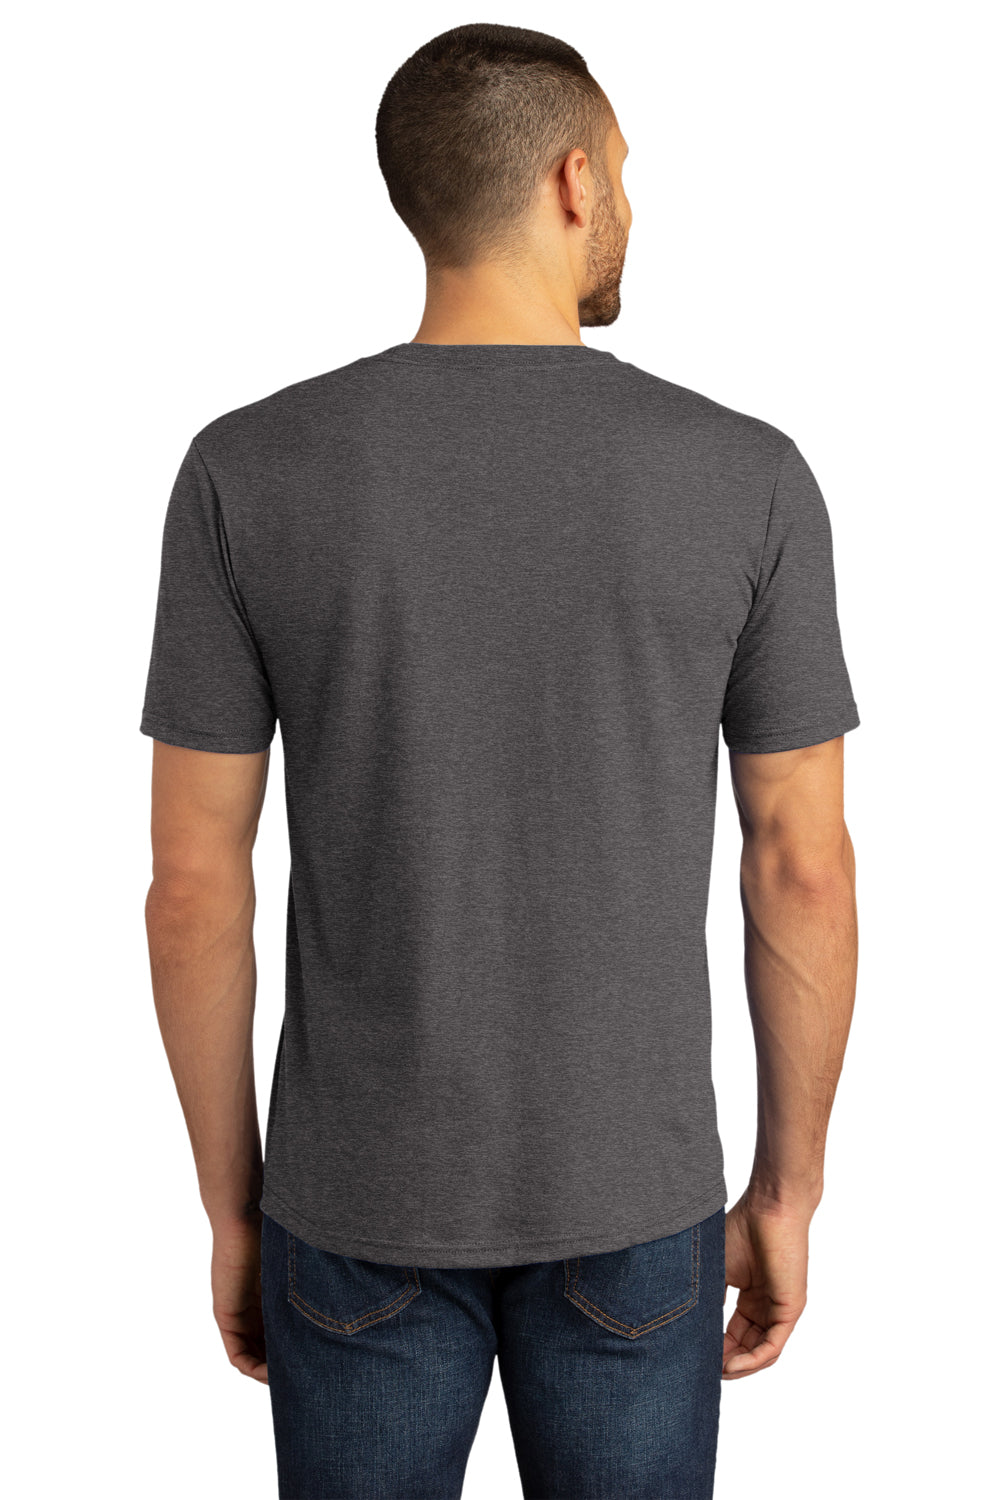 District Mens Perfect DTG Short Sleeve Crewneck T-Shirt Heather Charcoal Grey Side